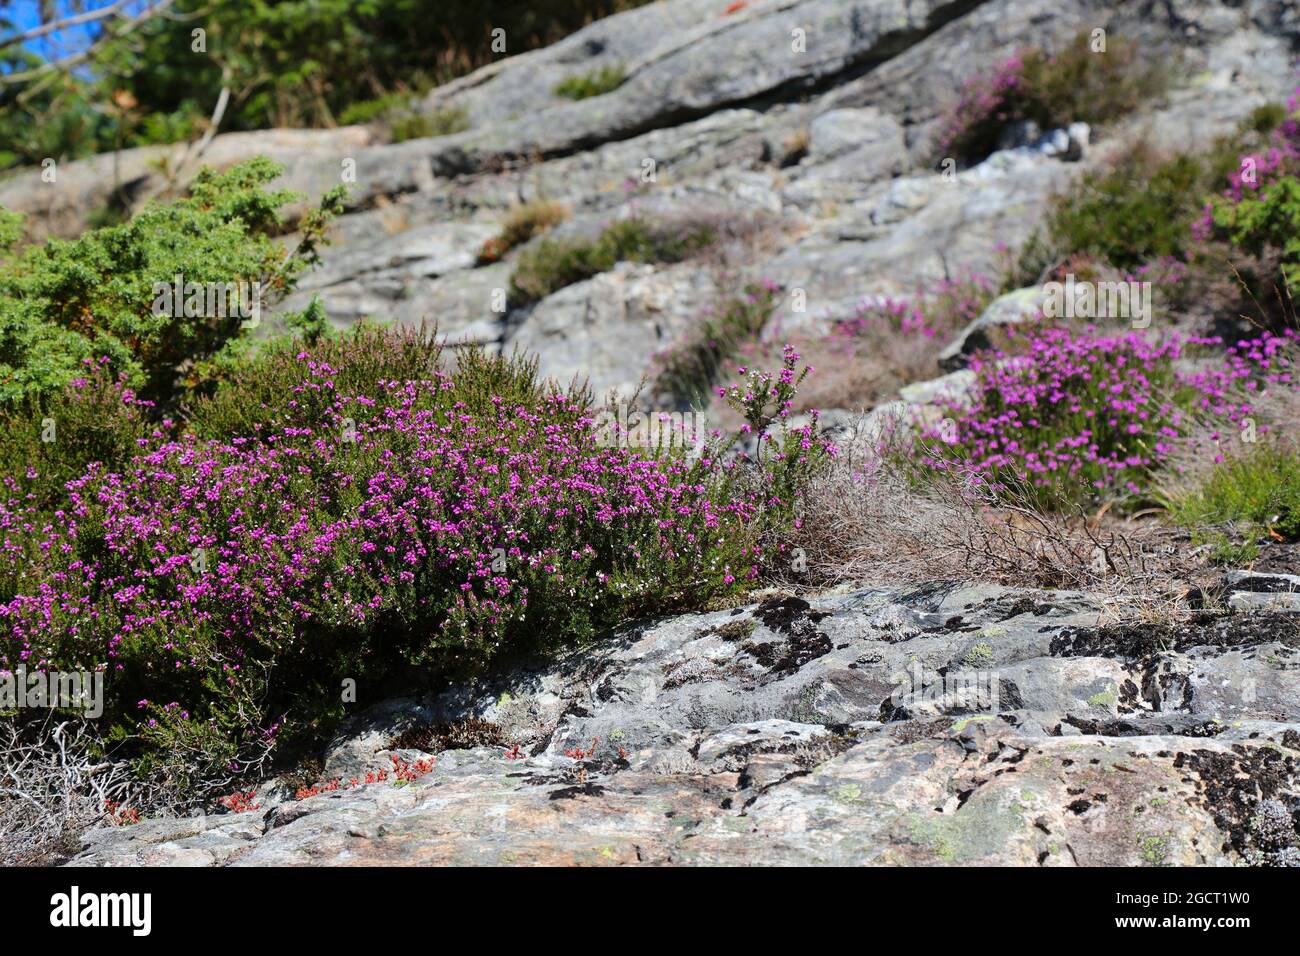 Norway nature. Heather plant (also known as ling, Calluna vulgaris in Latin). Cold-hardy plant species in Scandinavia. Stock Photo